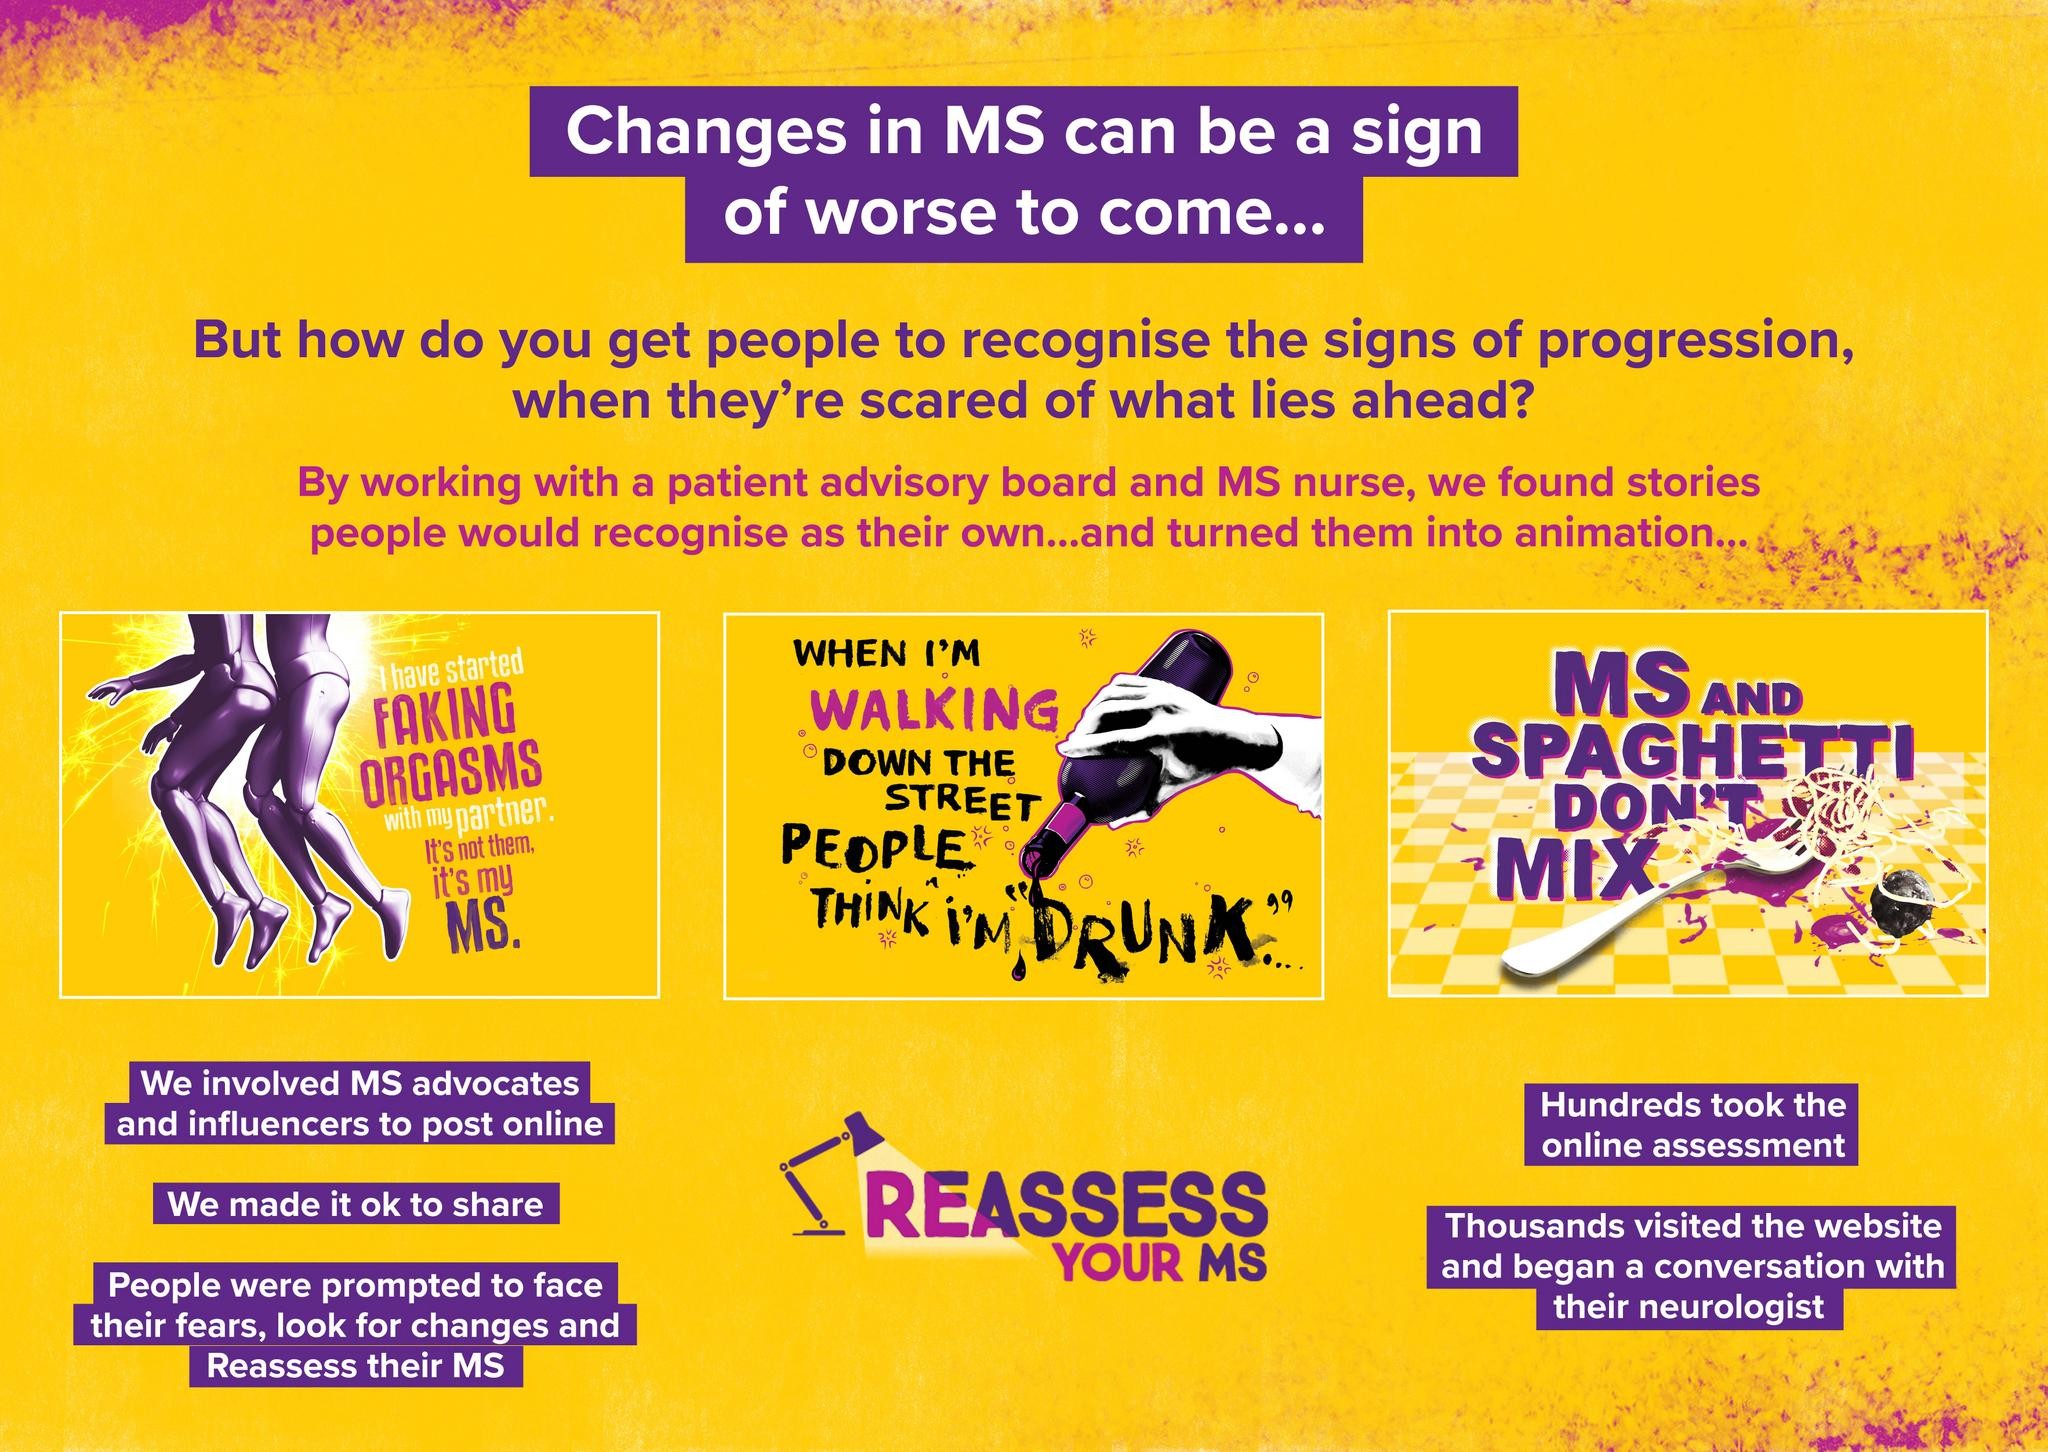 Reassess Your MS